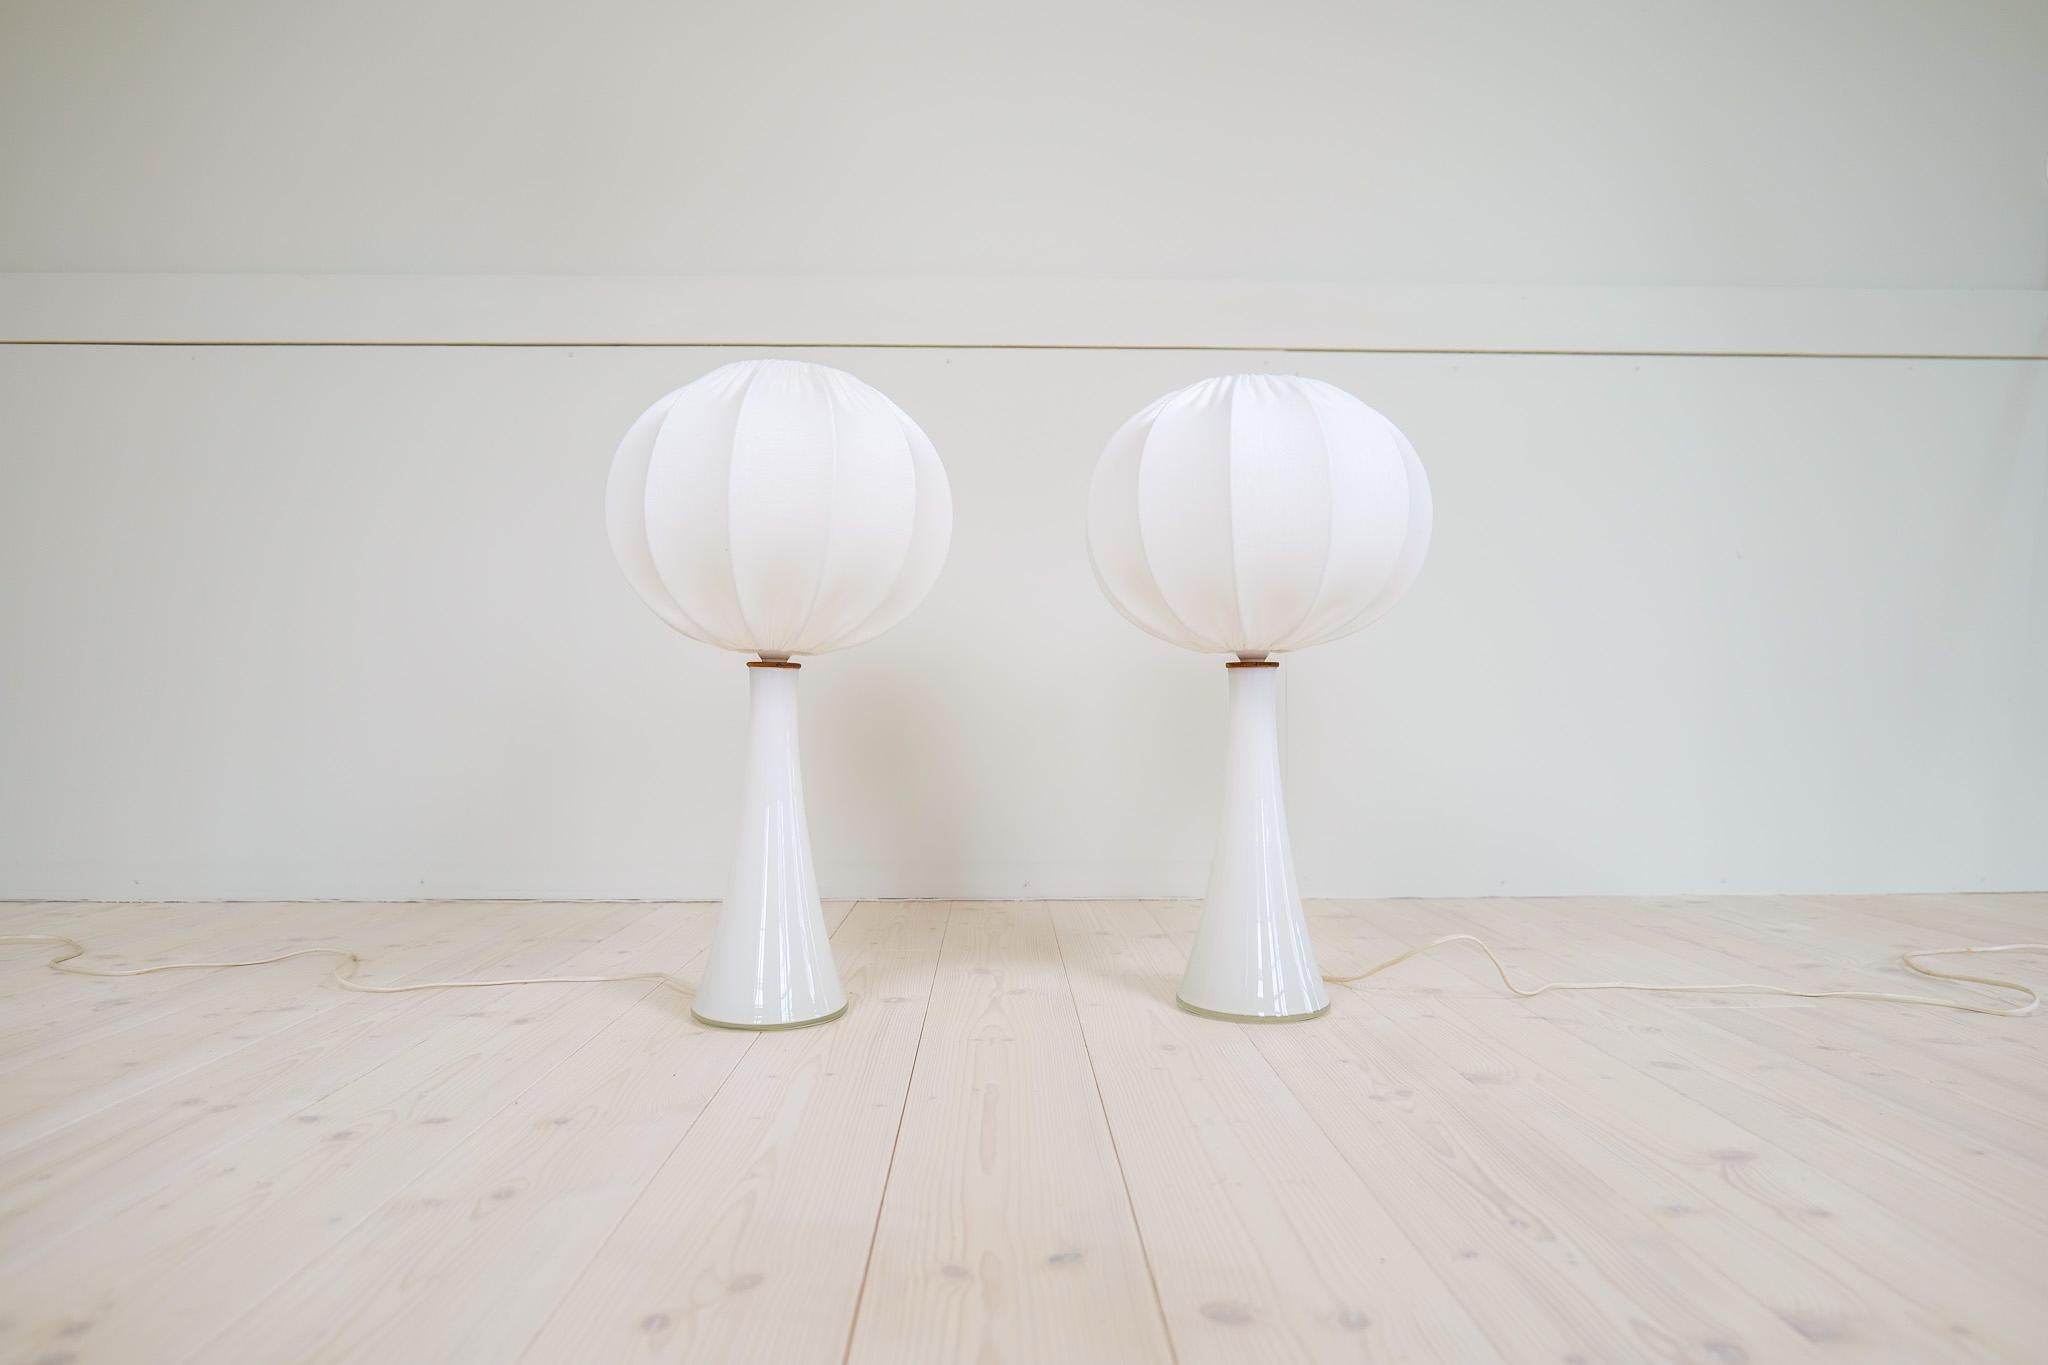 Midcentury Pair of Opaline Glass Table Lamps Cotton Shades Bergboms Sweden, 1960 In Good Condition For Sale In Hillringsberg, SE